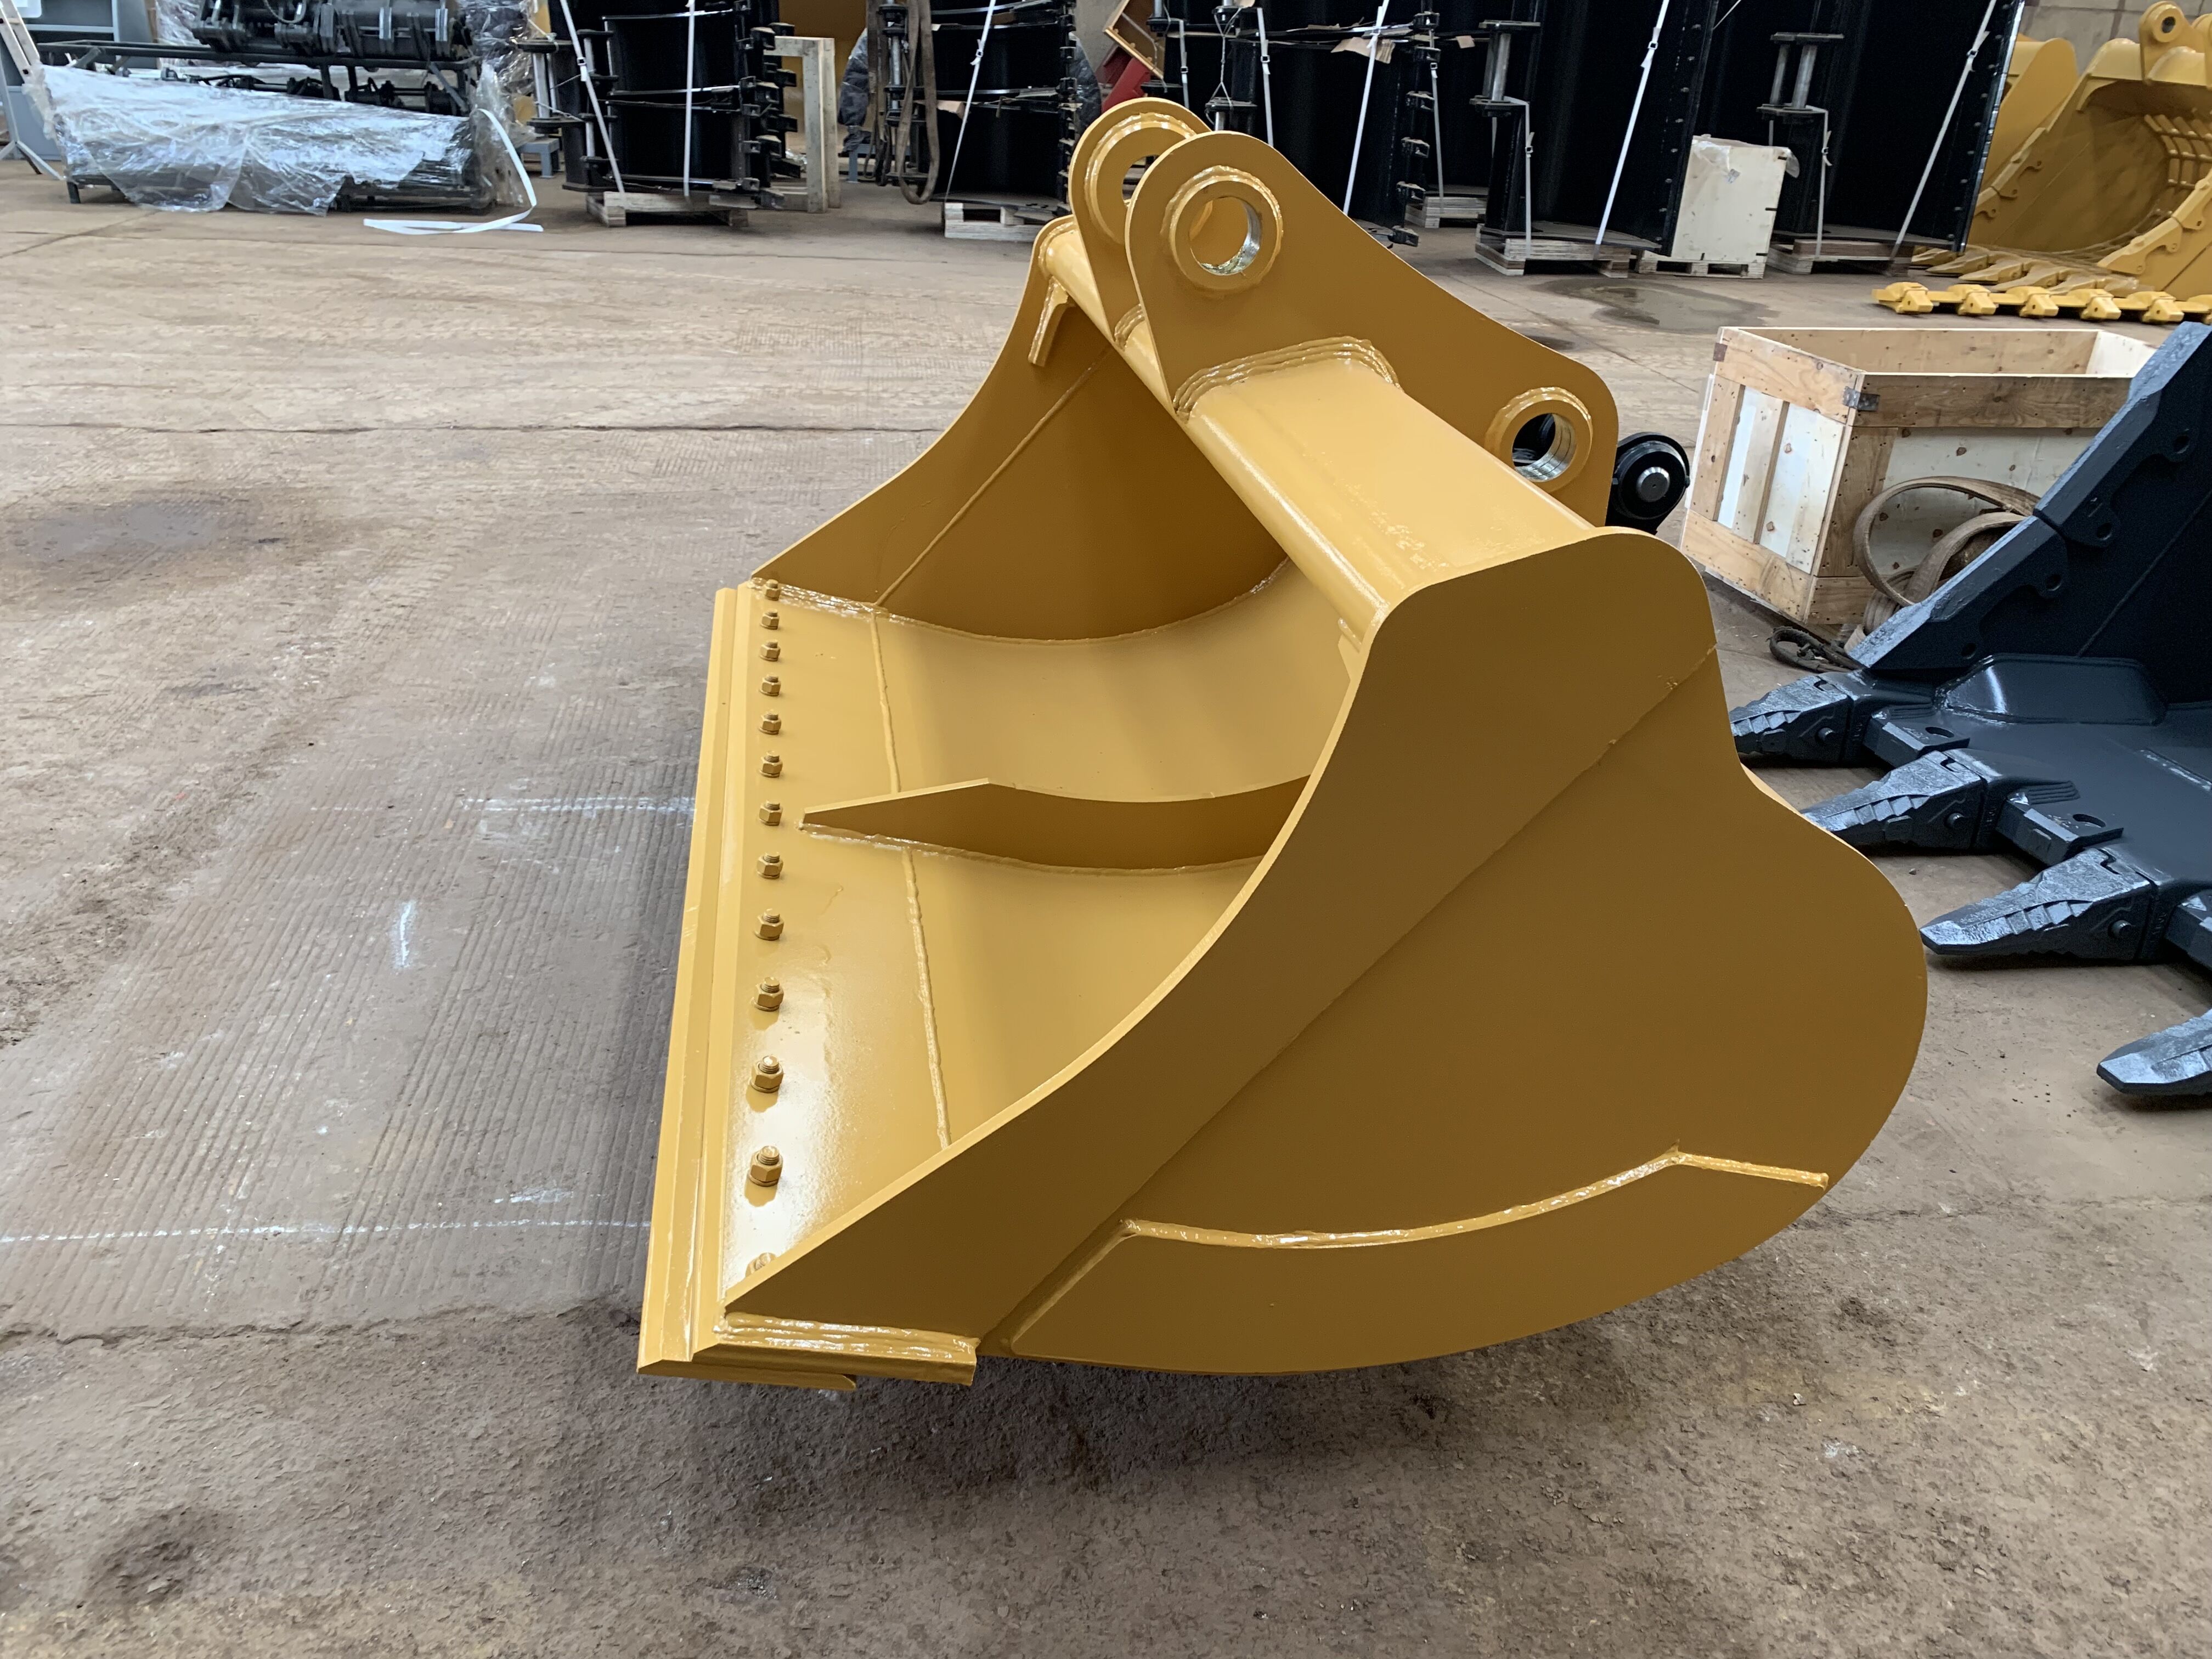 Cheap price Severe-Duty Bucket - BONOVO durable ditching clean bucket for trenching and loading - Bonovo - Bonovo